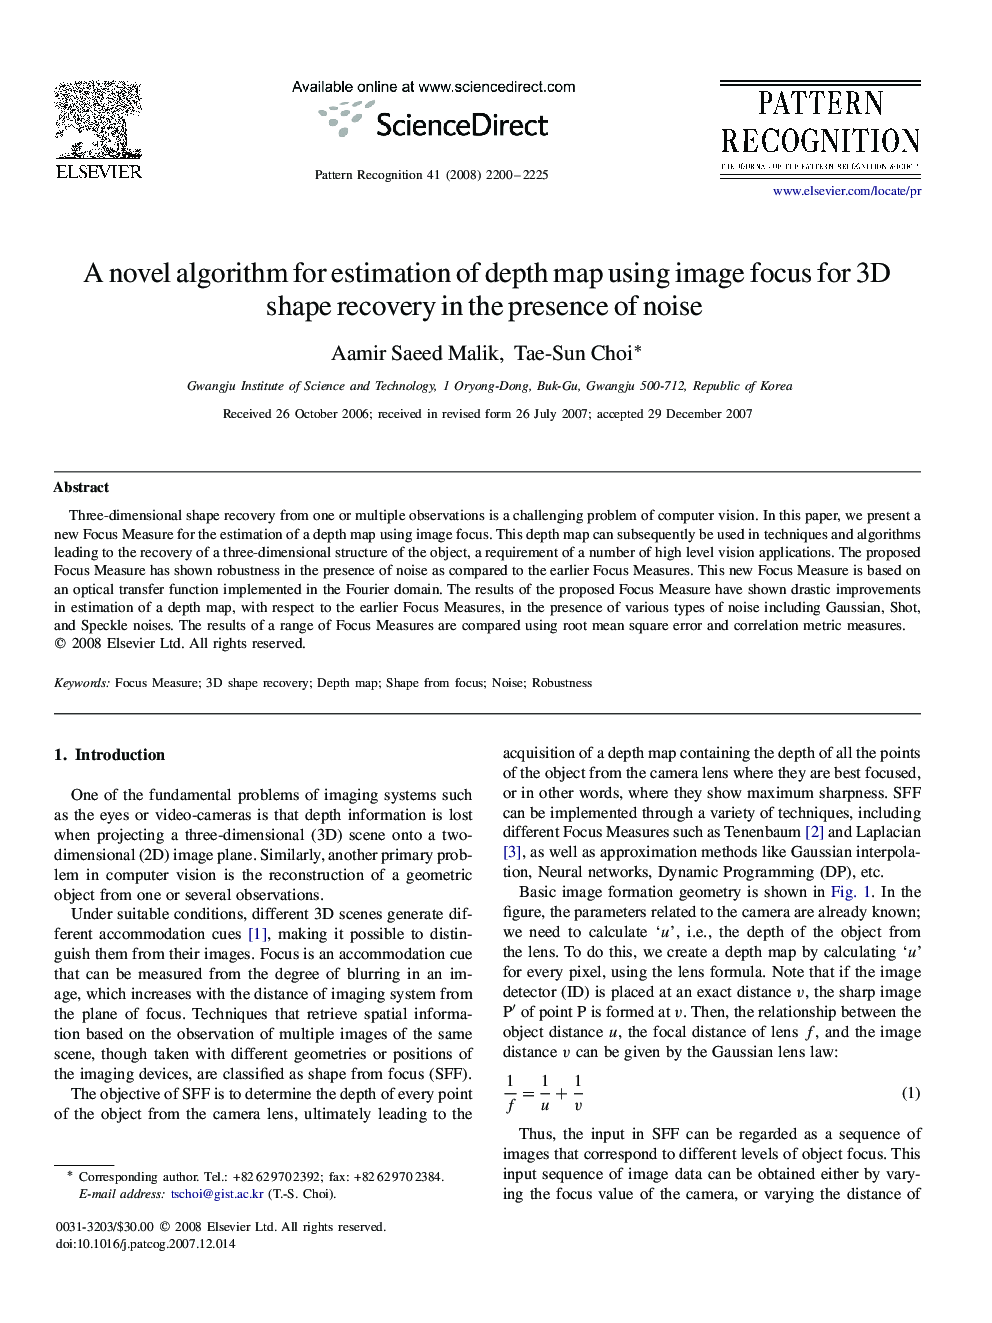 A novel algorithm for estimation of depth map using image focus for 3D shape recovery in the presence of noise